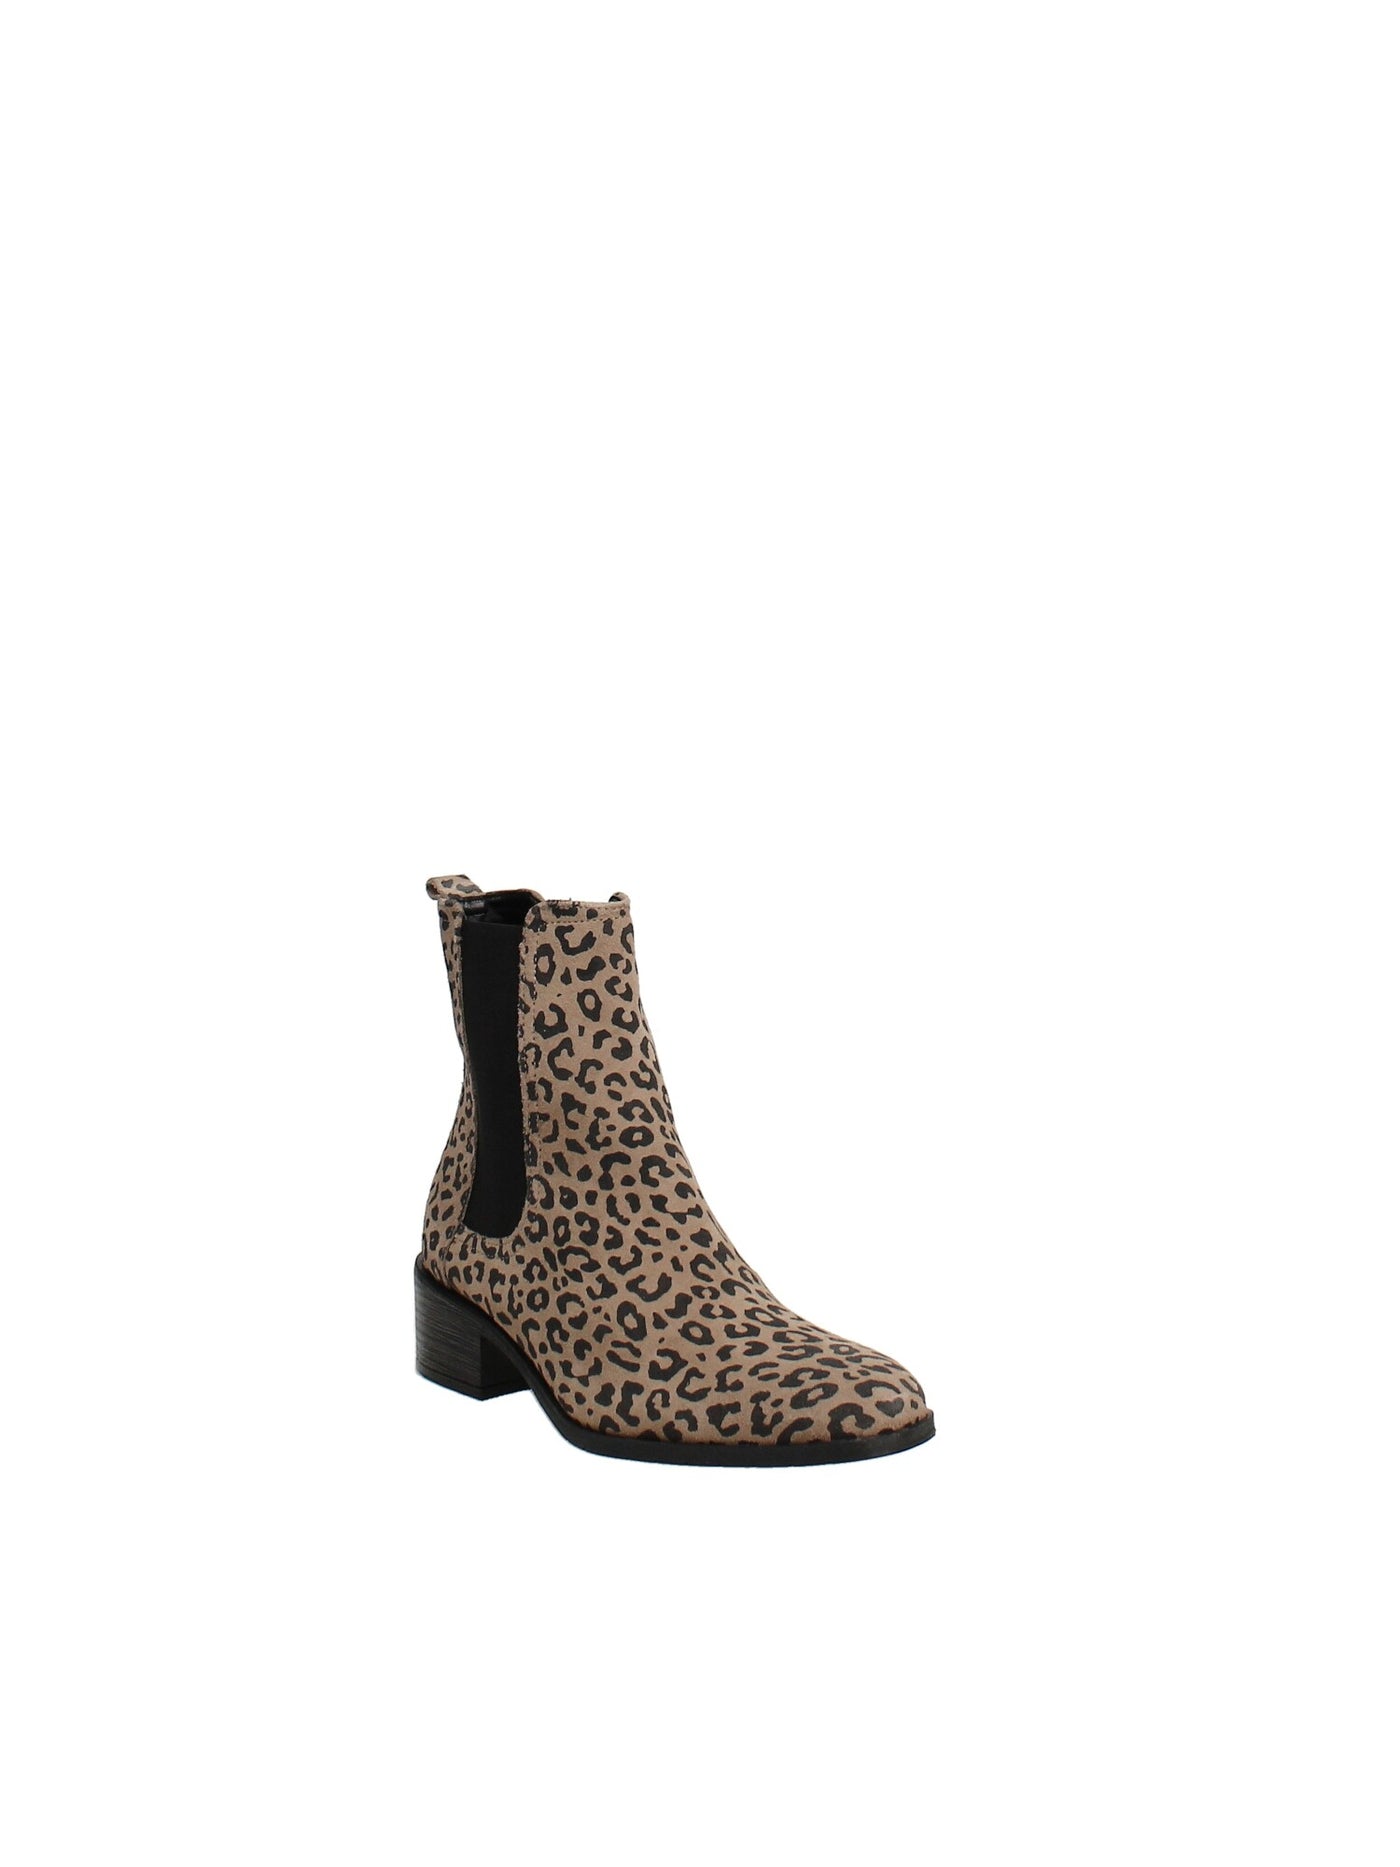 REACTION KENNETH COLE Womens Beige Leopard Print Chelsea Boot Cushioned Salt Chelsea Round Toe Block Heel Leather Booties 6.5